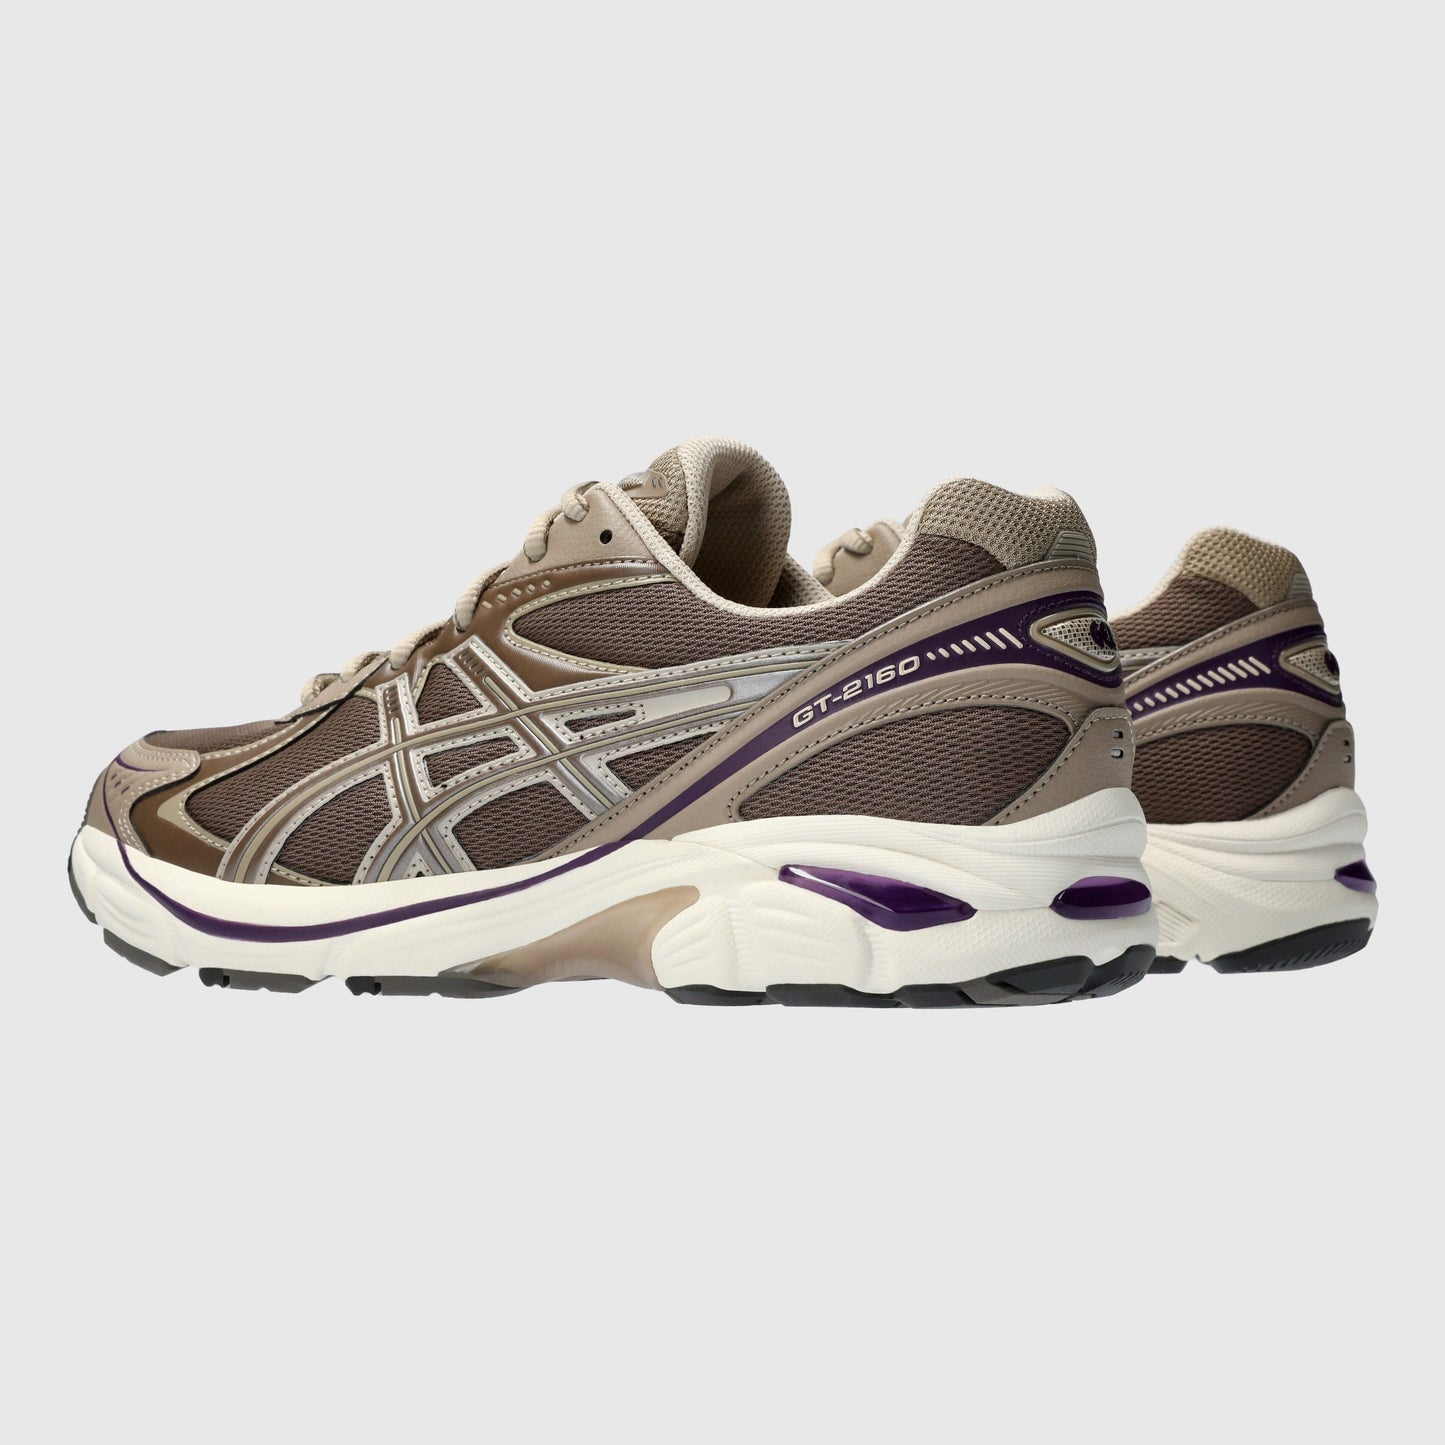 Asics GT-2160 Sneakers - Dark Taupe / Taupe Grey Sneakers Asics 